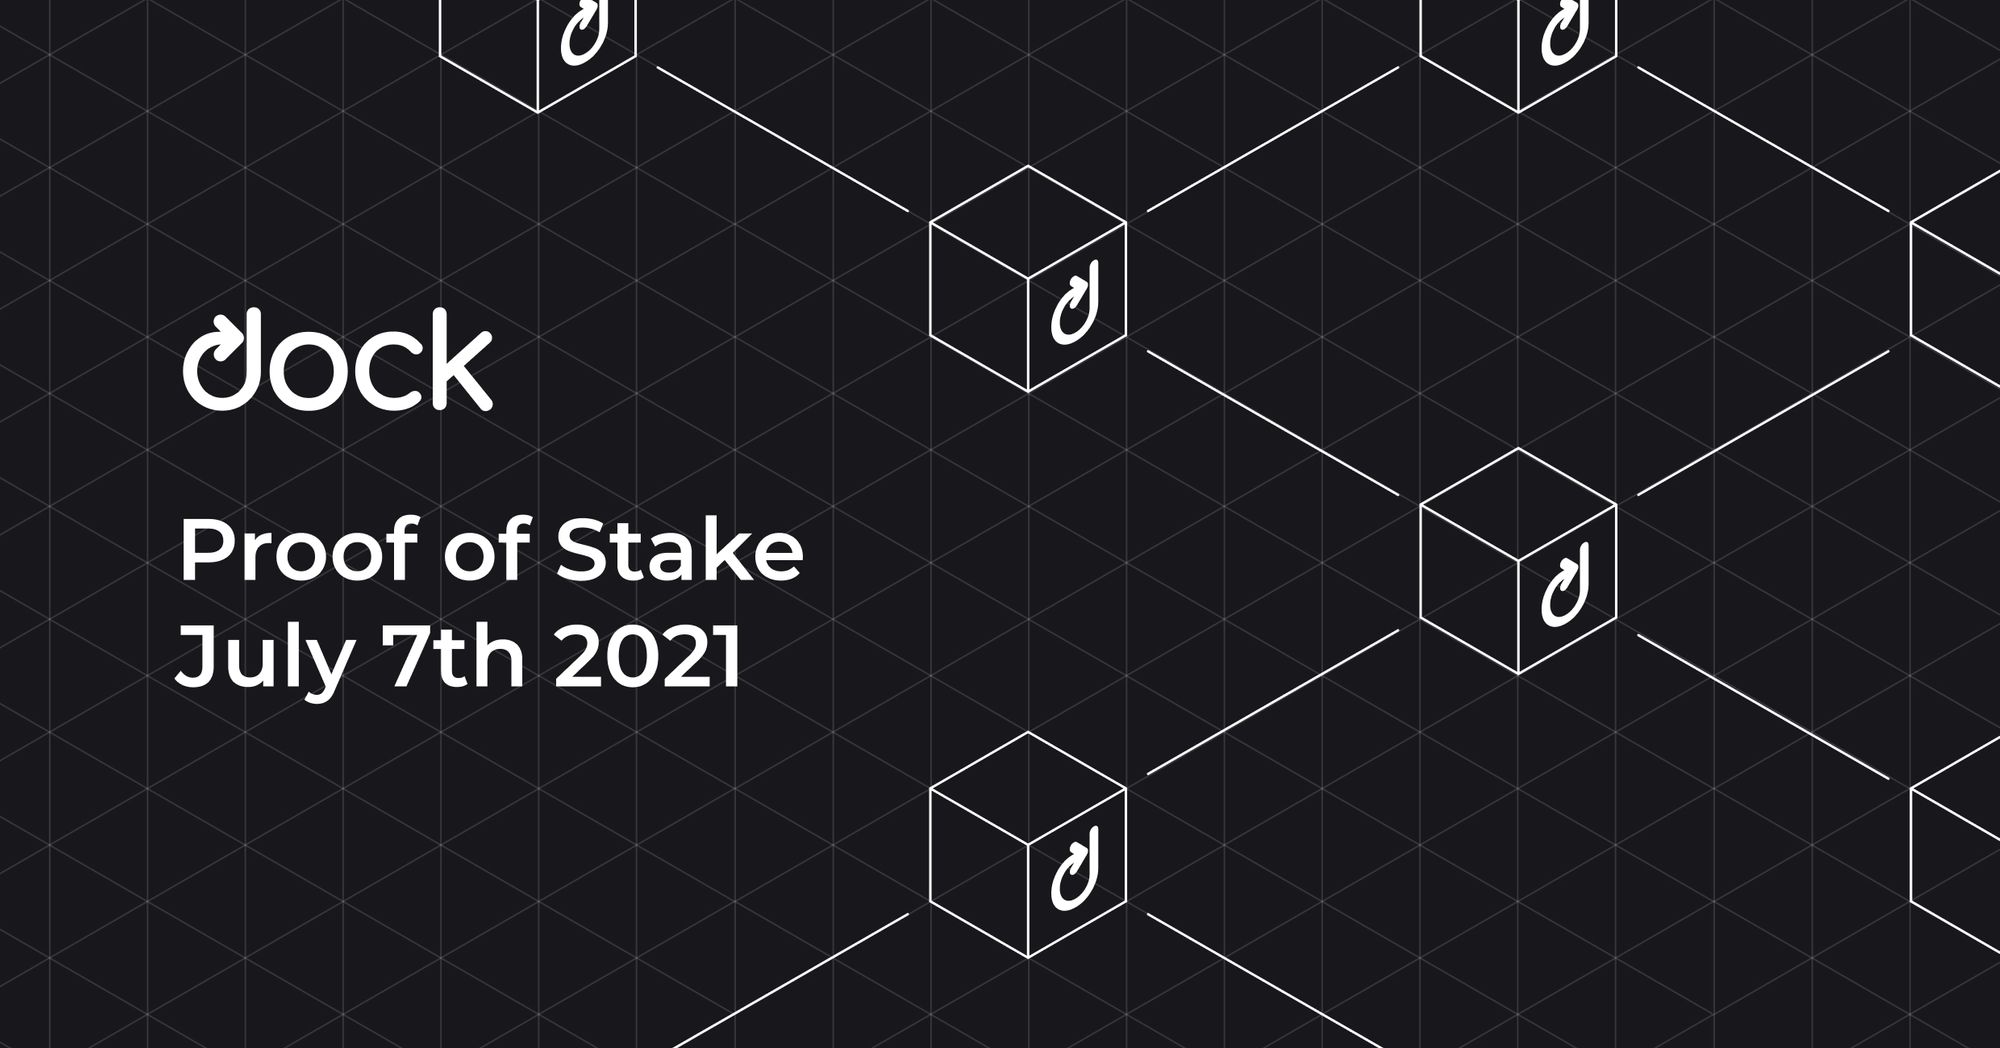 Dock’s Proof of Stake Mainnet Will Launch on July 7th, 2021